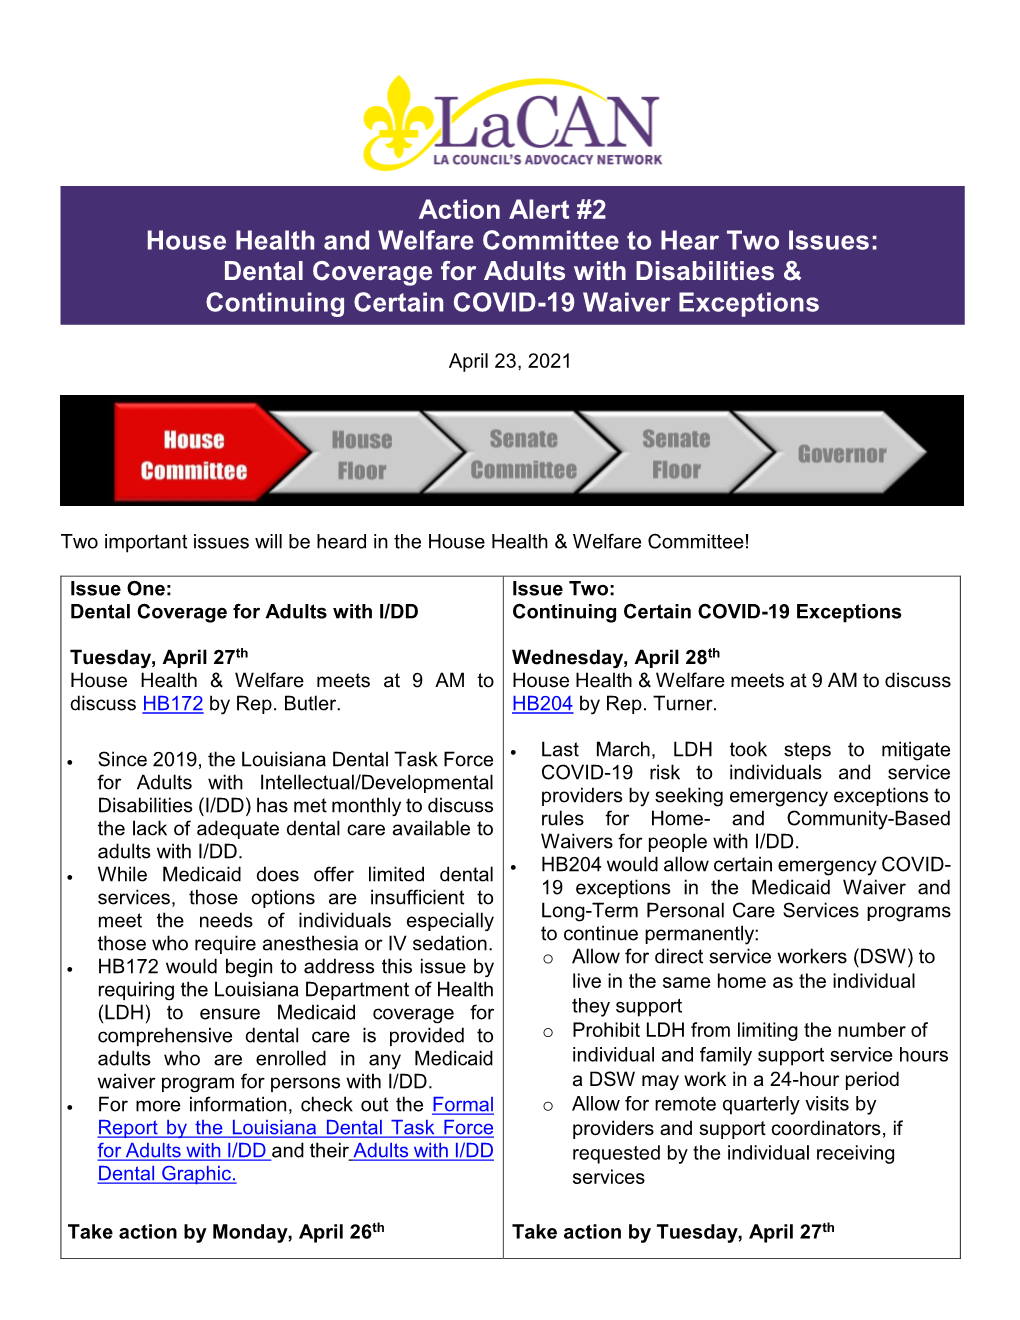 Action Alert #2 House Health and Welfare Committee to Hear Two Issues: Dental Coverage for Adults with Disabilities & Continuing Certain COVID-19 Waiver Exceptions